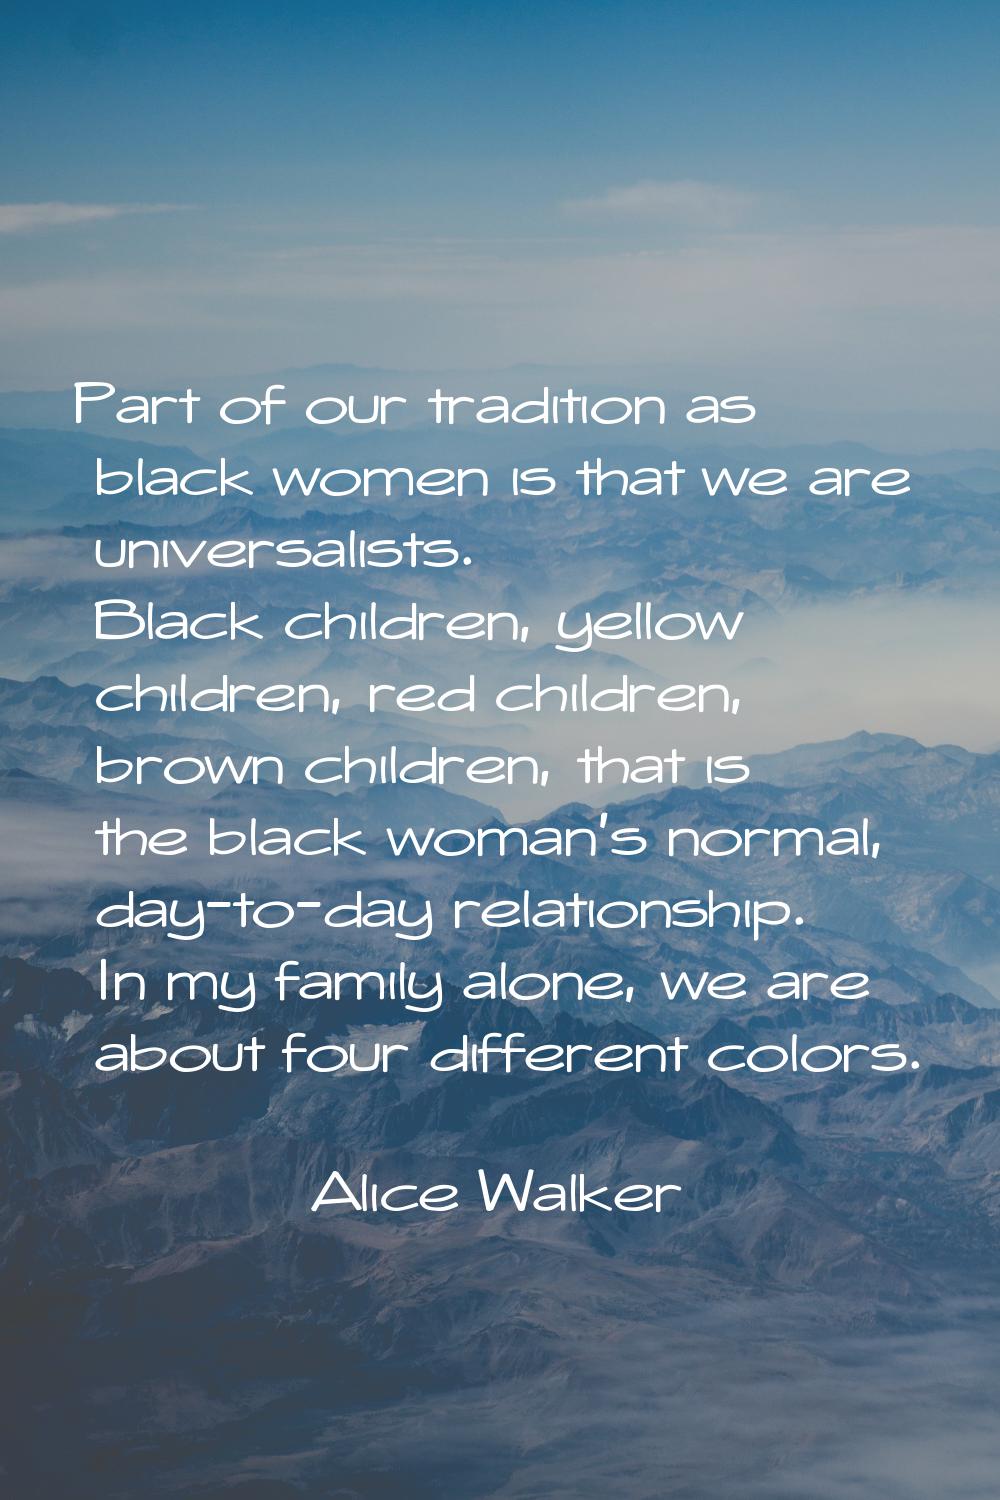 Part of our tradition as black women is that we are universalists. Black children, yellow children,